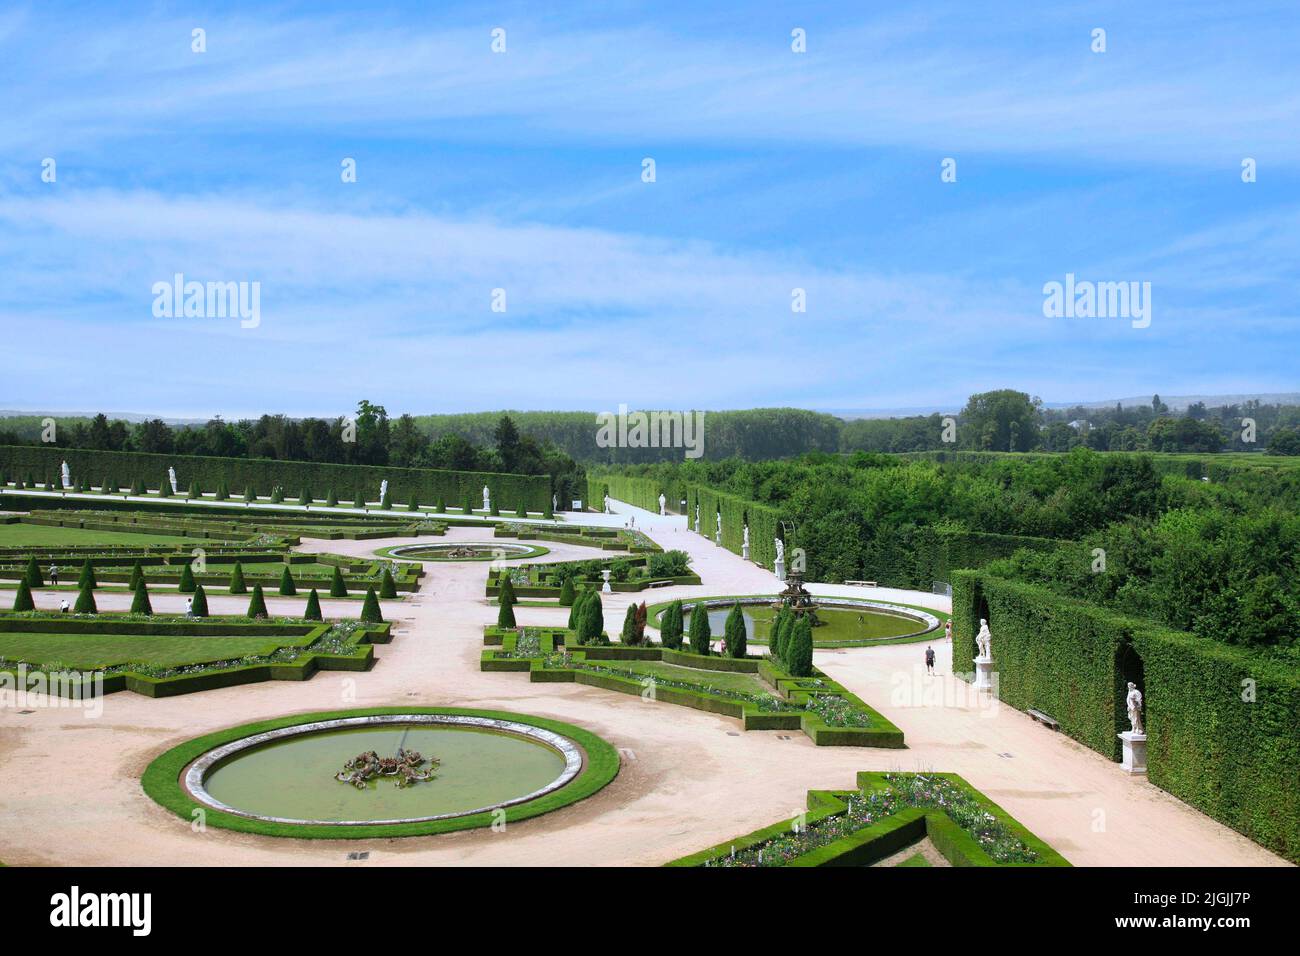 Garden at the Chateau de Versailles with carefully sculpted shrubbery Stock Photo